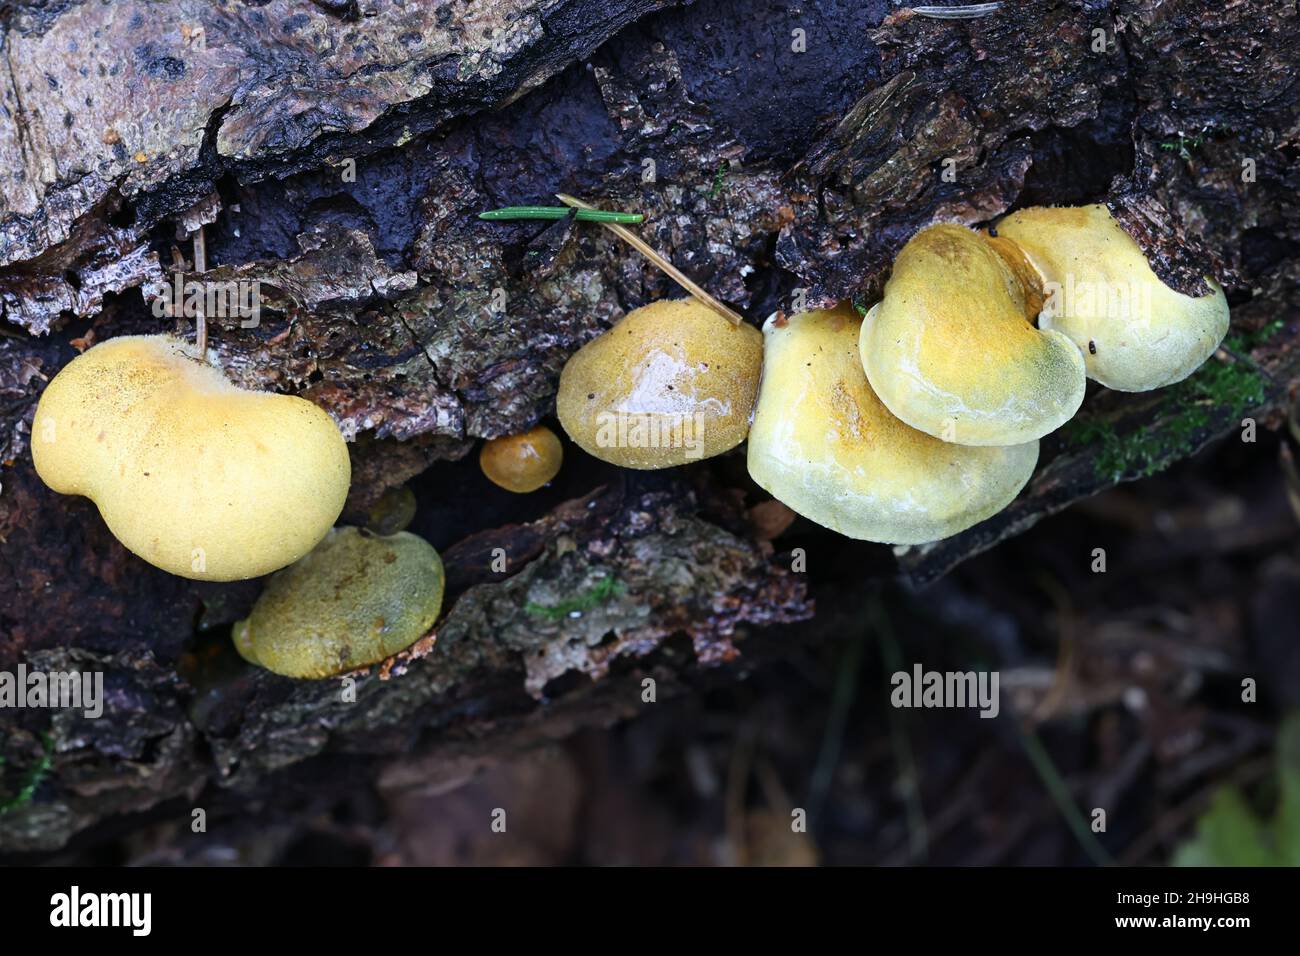 Sarcomyxa serotina, commonly known as the late oyster or olive oysterling, wild mushroom from Finland Stock Photo